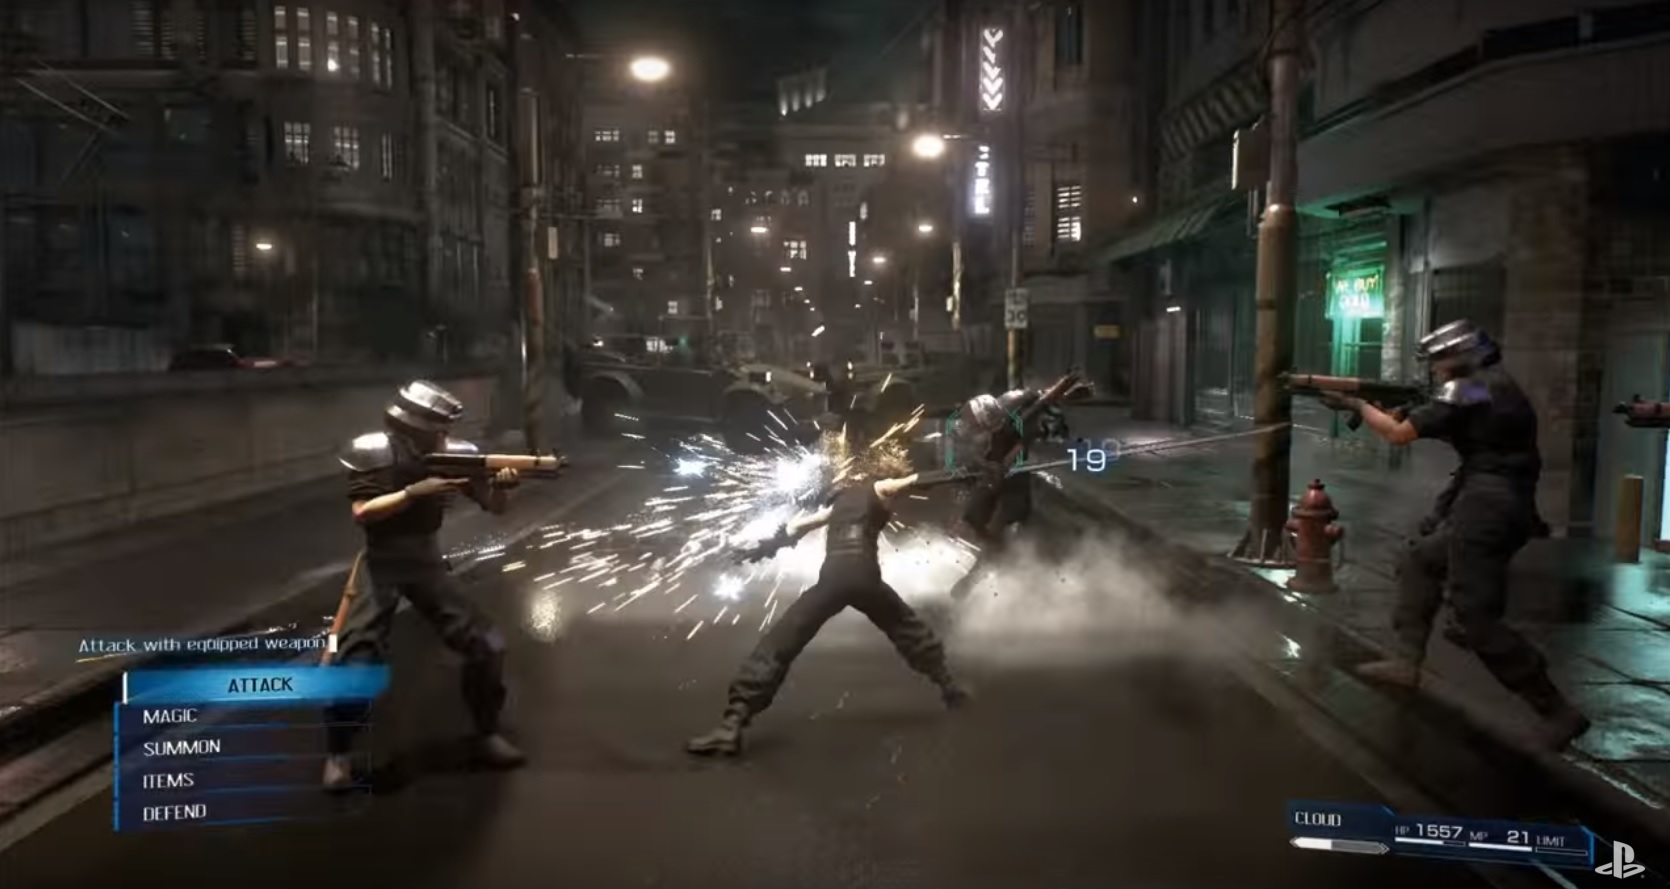 final-fantasy-vii-remake-gameplay-screenshot-attack-equipped-weapon-ps4